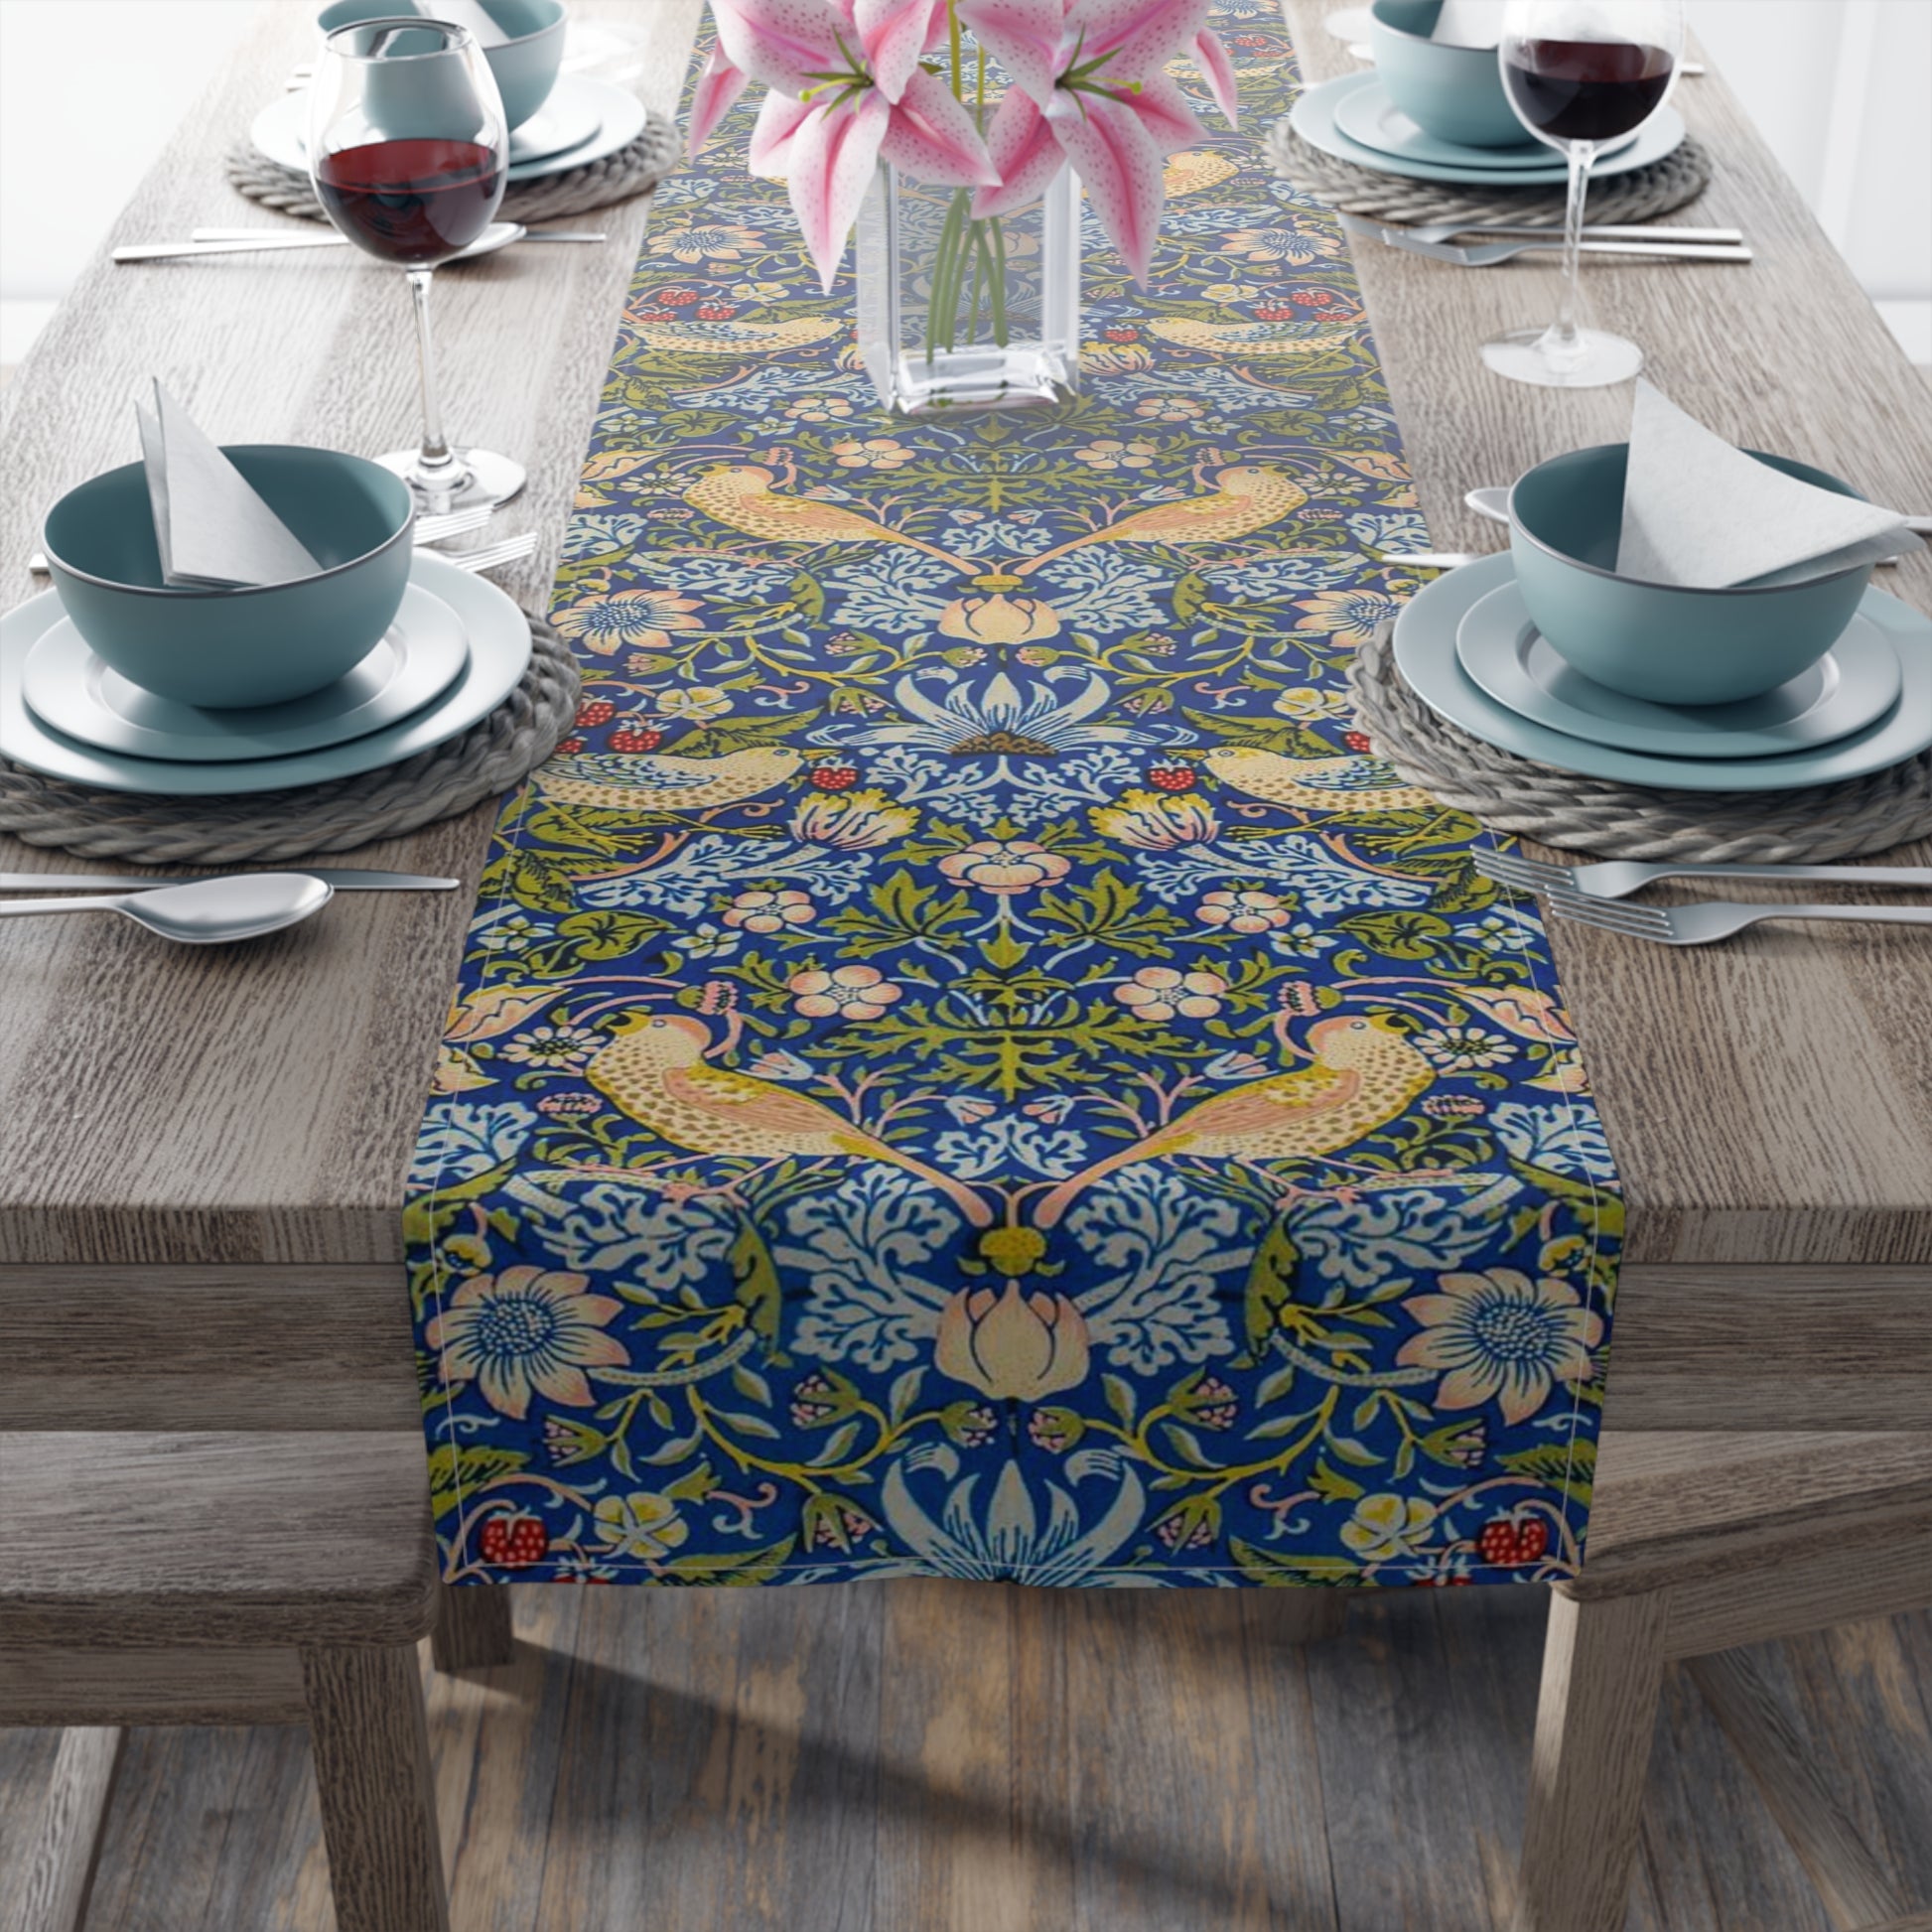 william-morris-co-table-runner-strawberry-thief-collection-indigo-3